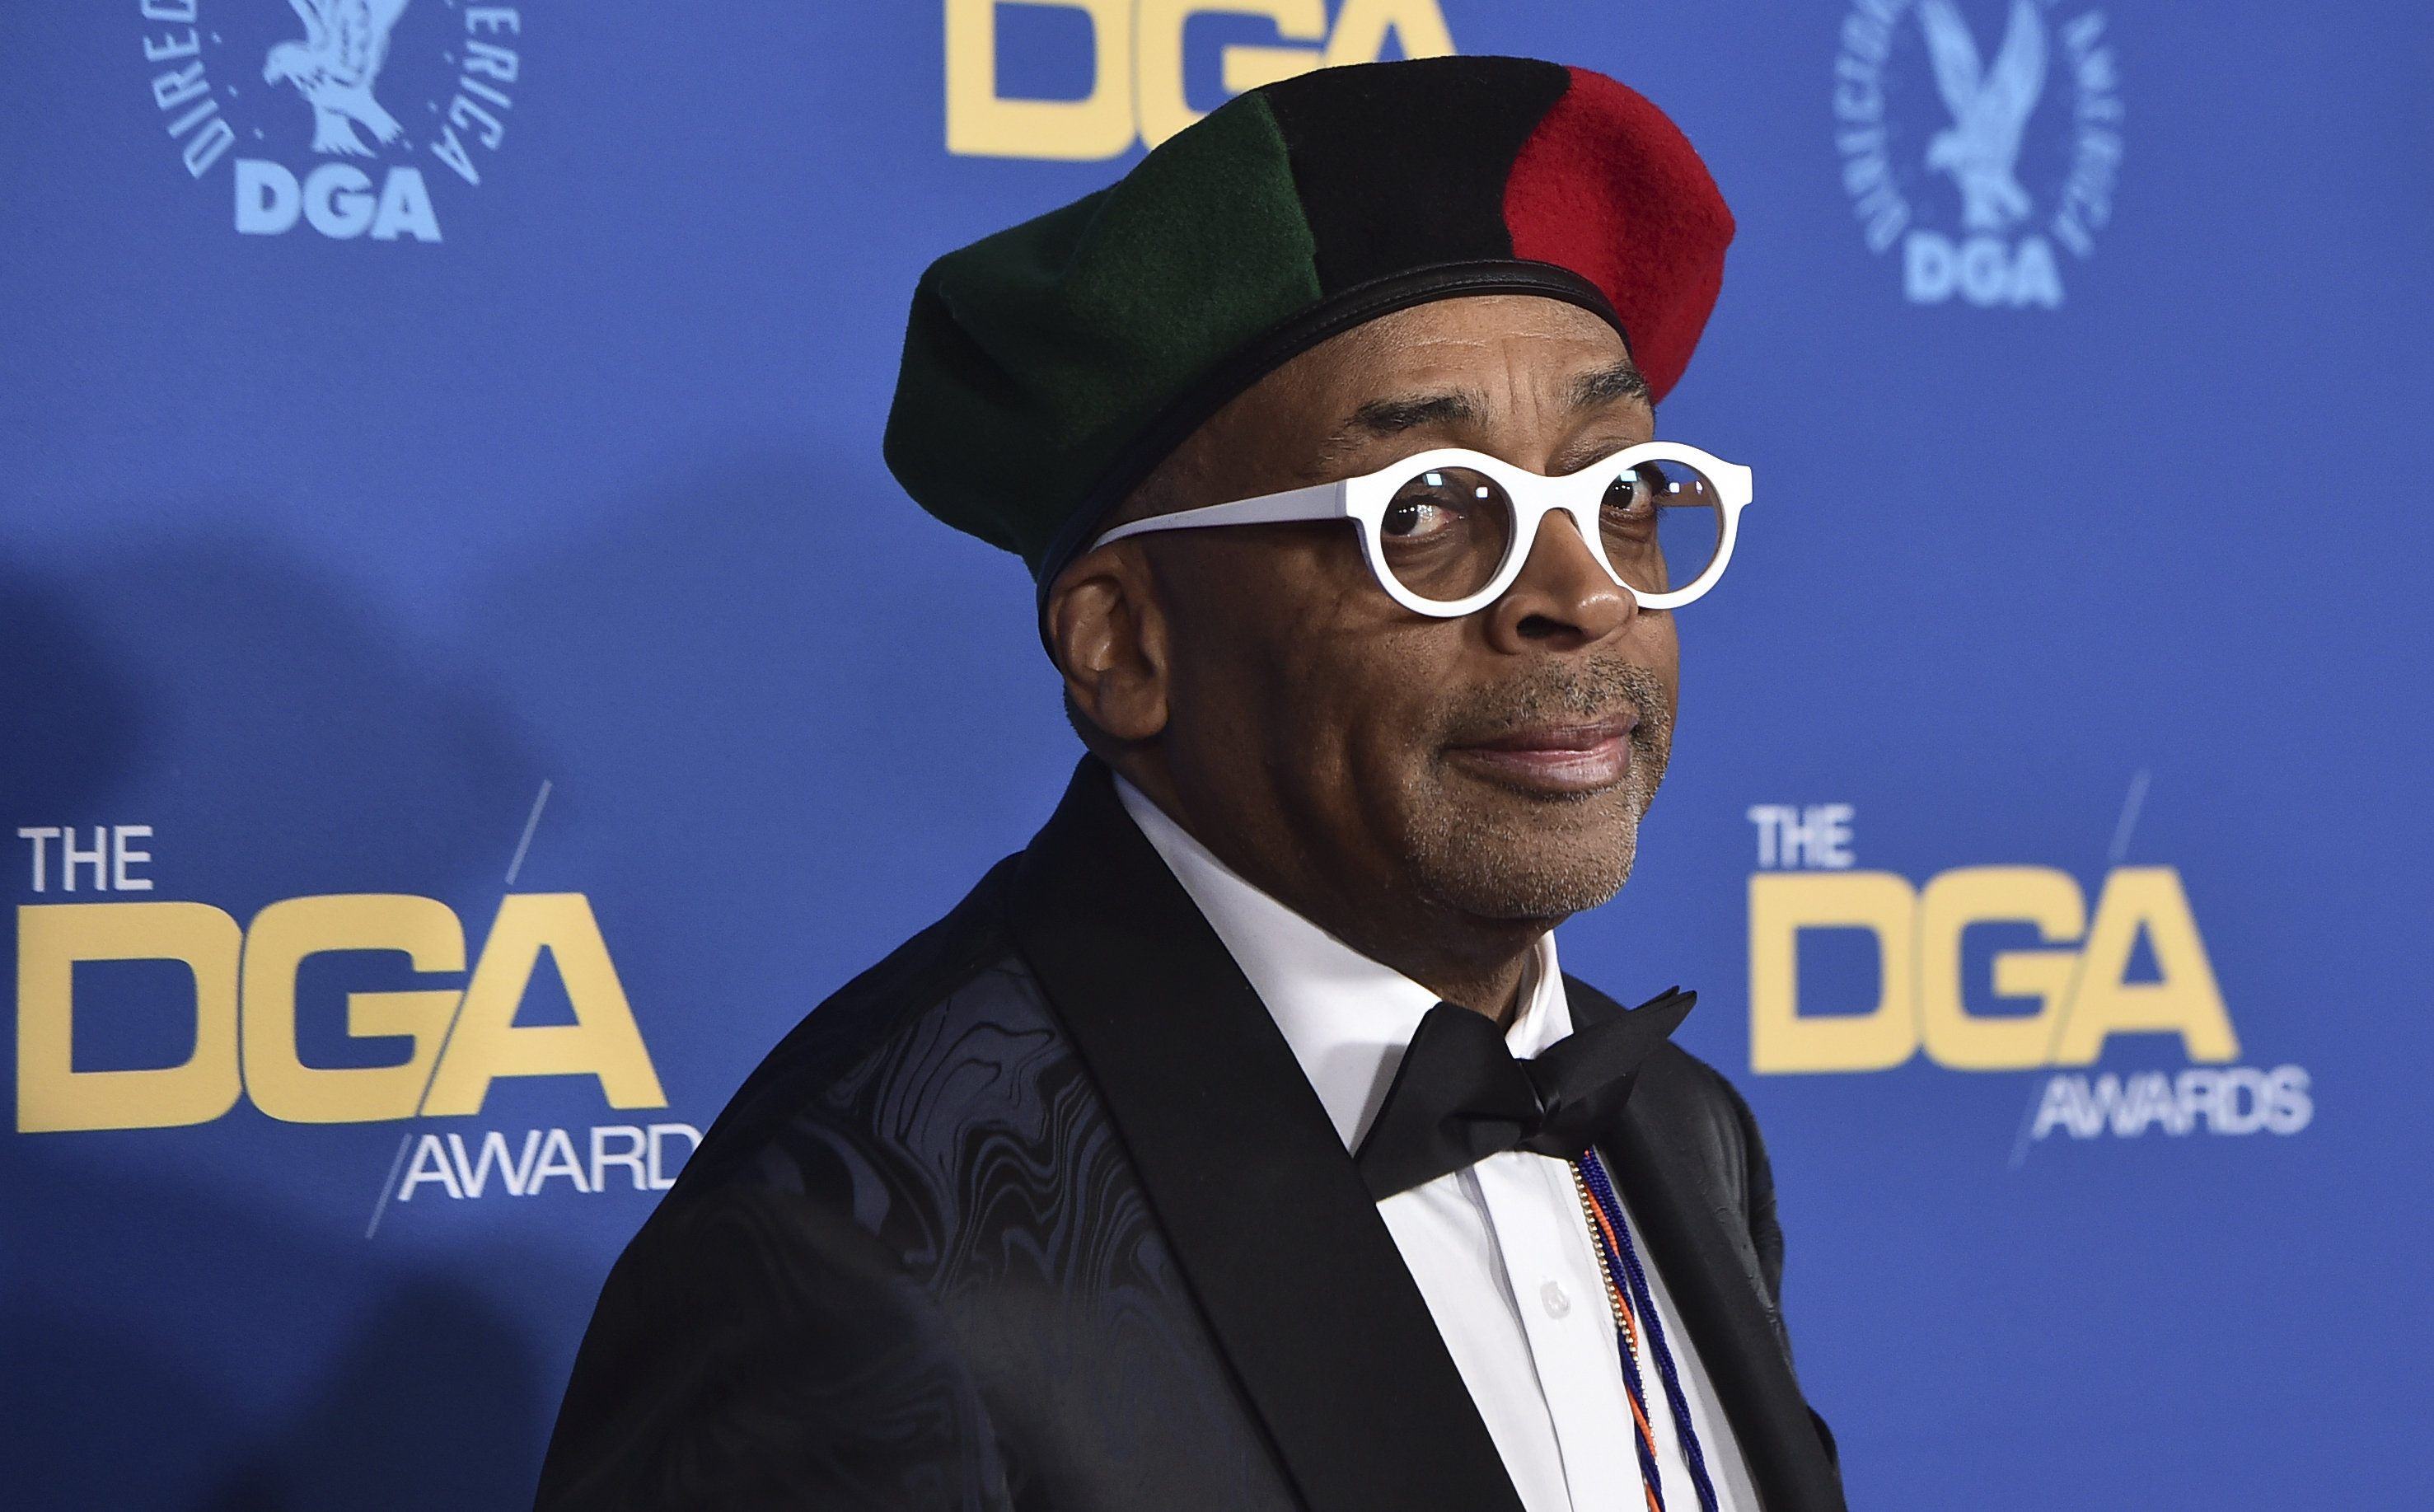 Spike Lee arrives at the 74th annual Directors Guild of America Awards, Saturday, March 12, 2022, at The Beverly Hilton in Beverly Hills, Calif. (Photo by Jordan Strauss/Invision/AP)